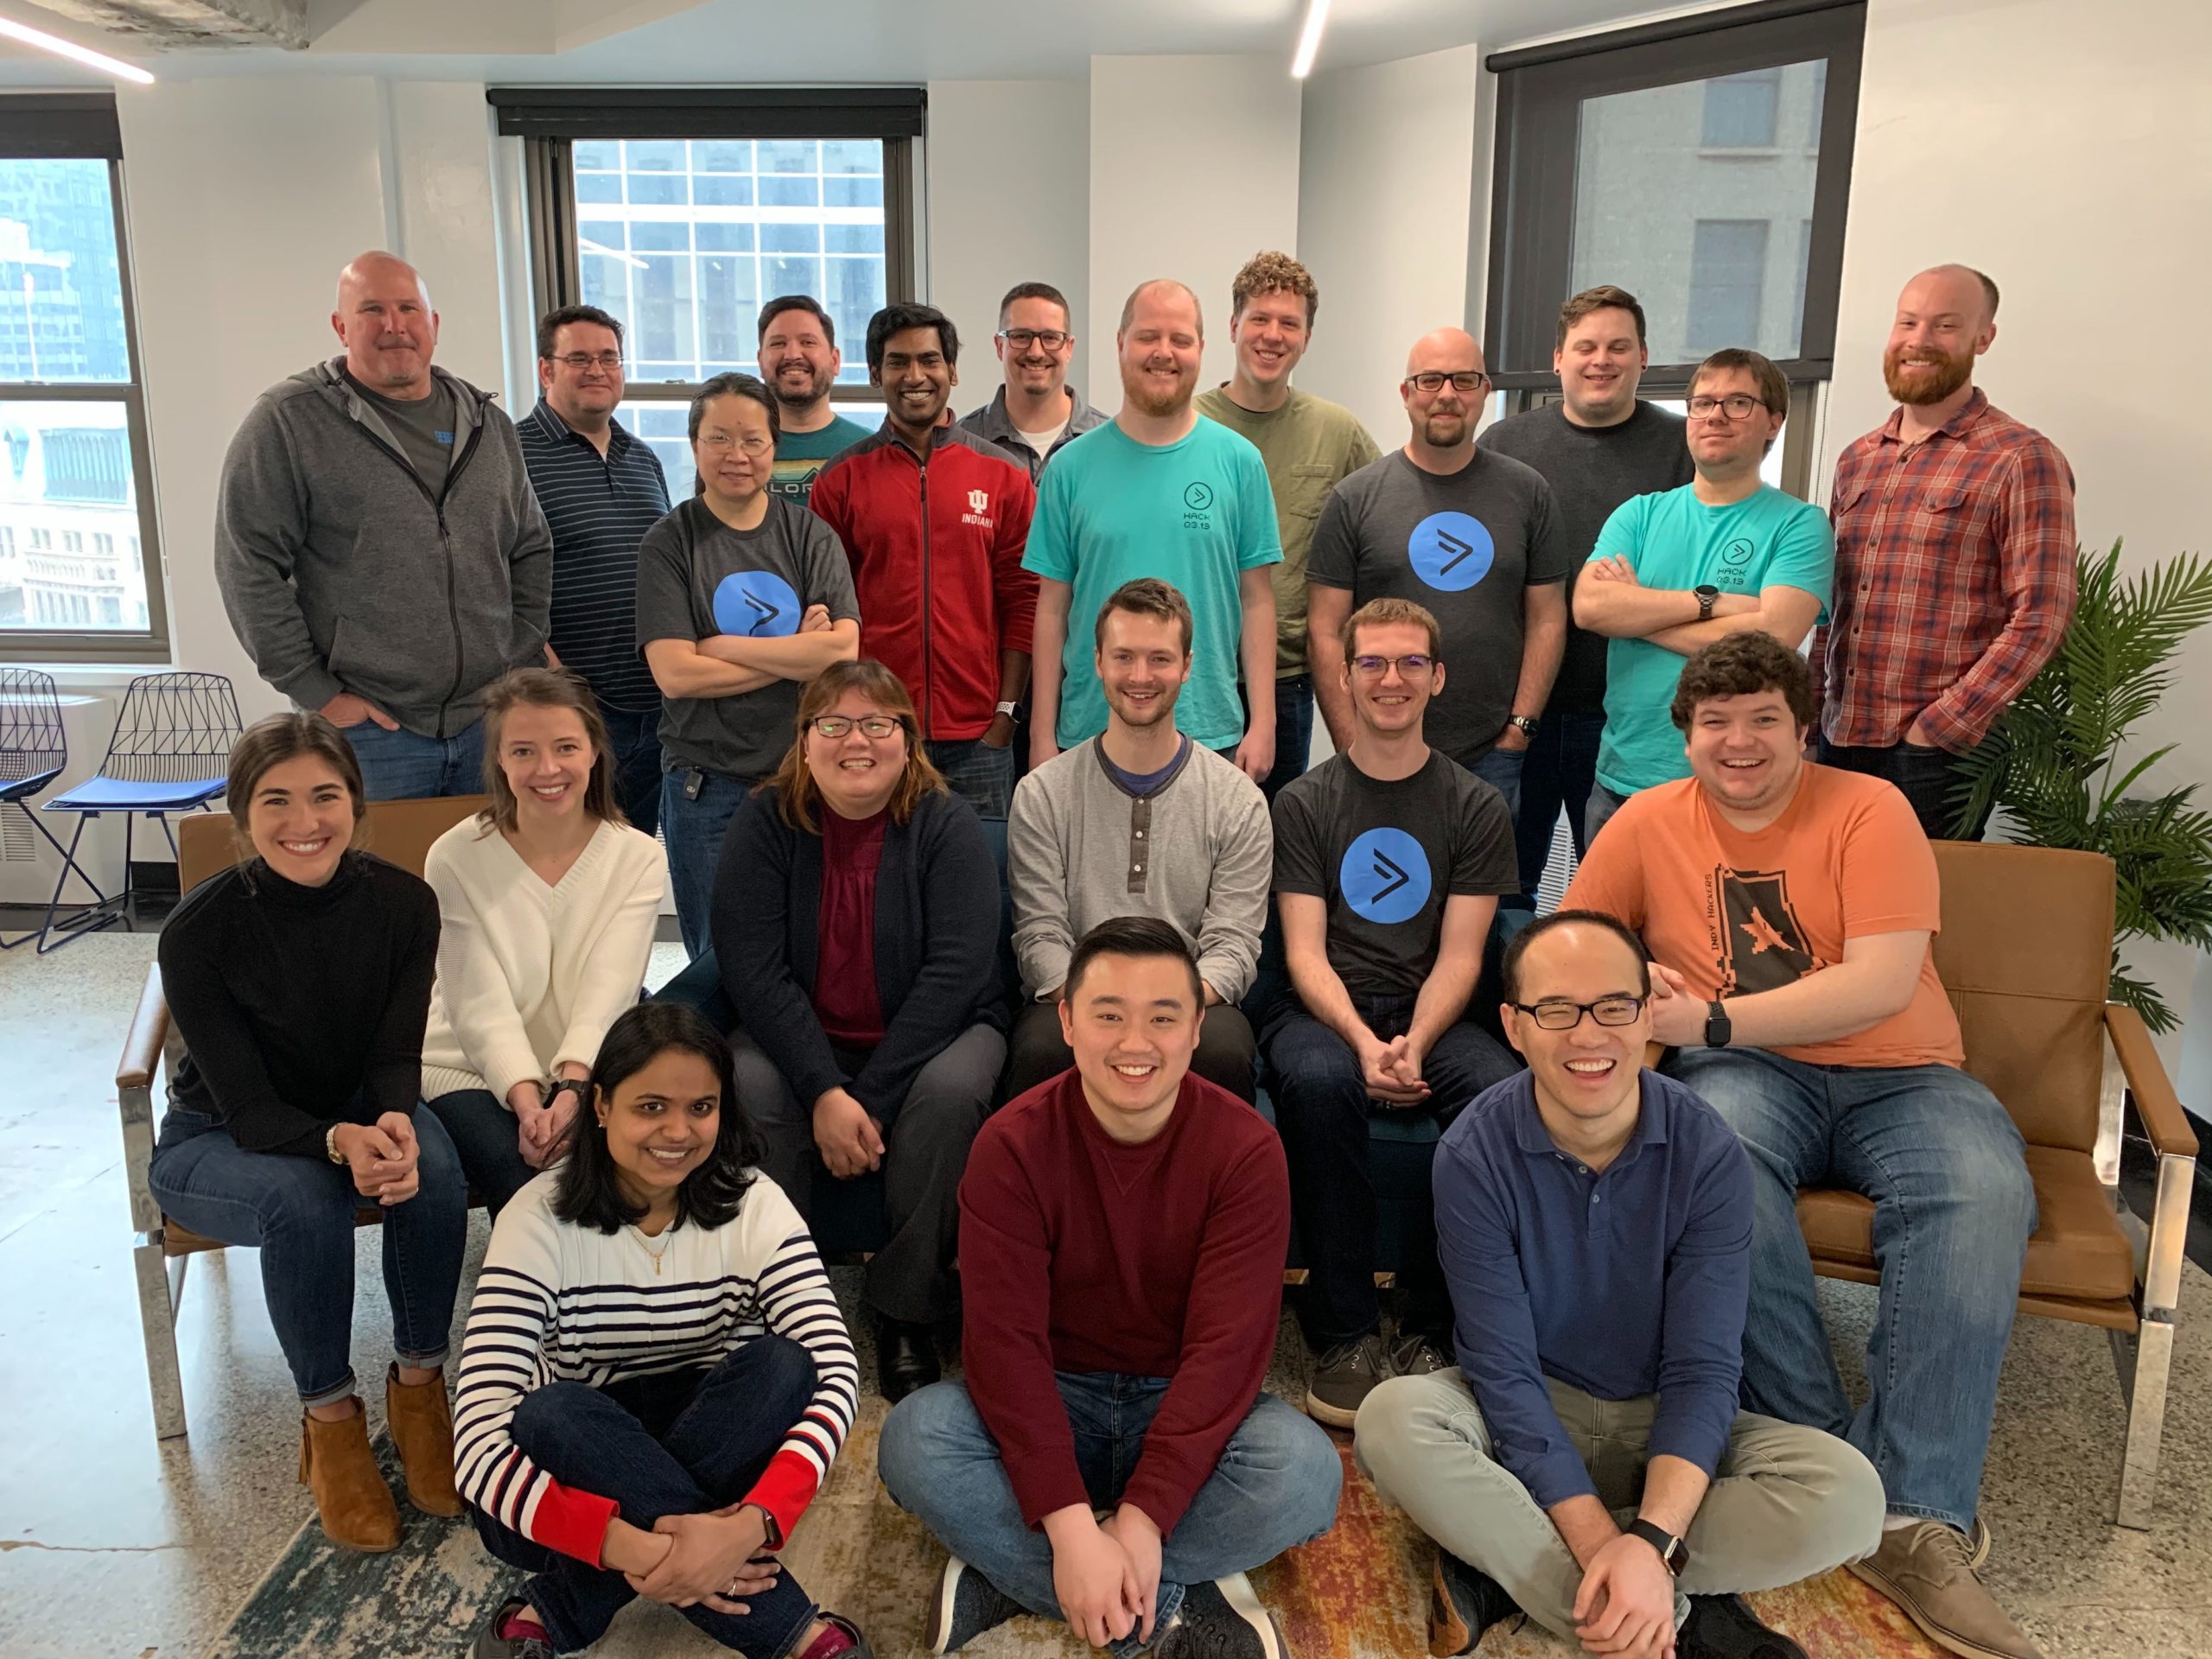 The Indianapolis team posing for an office group photo